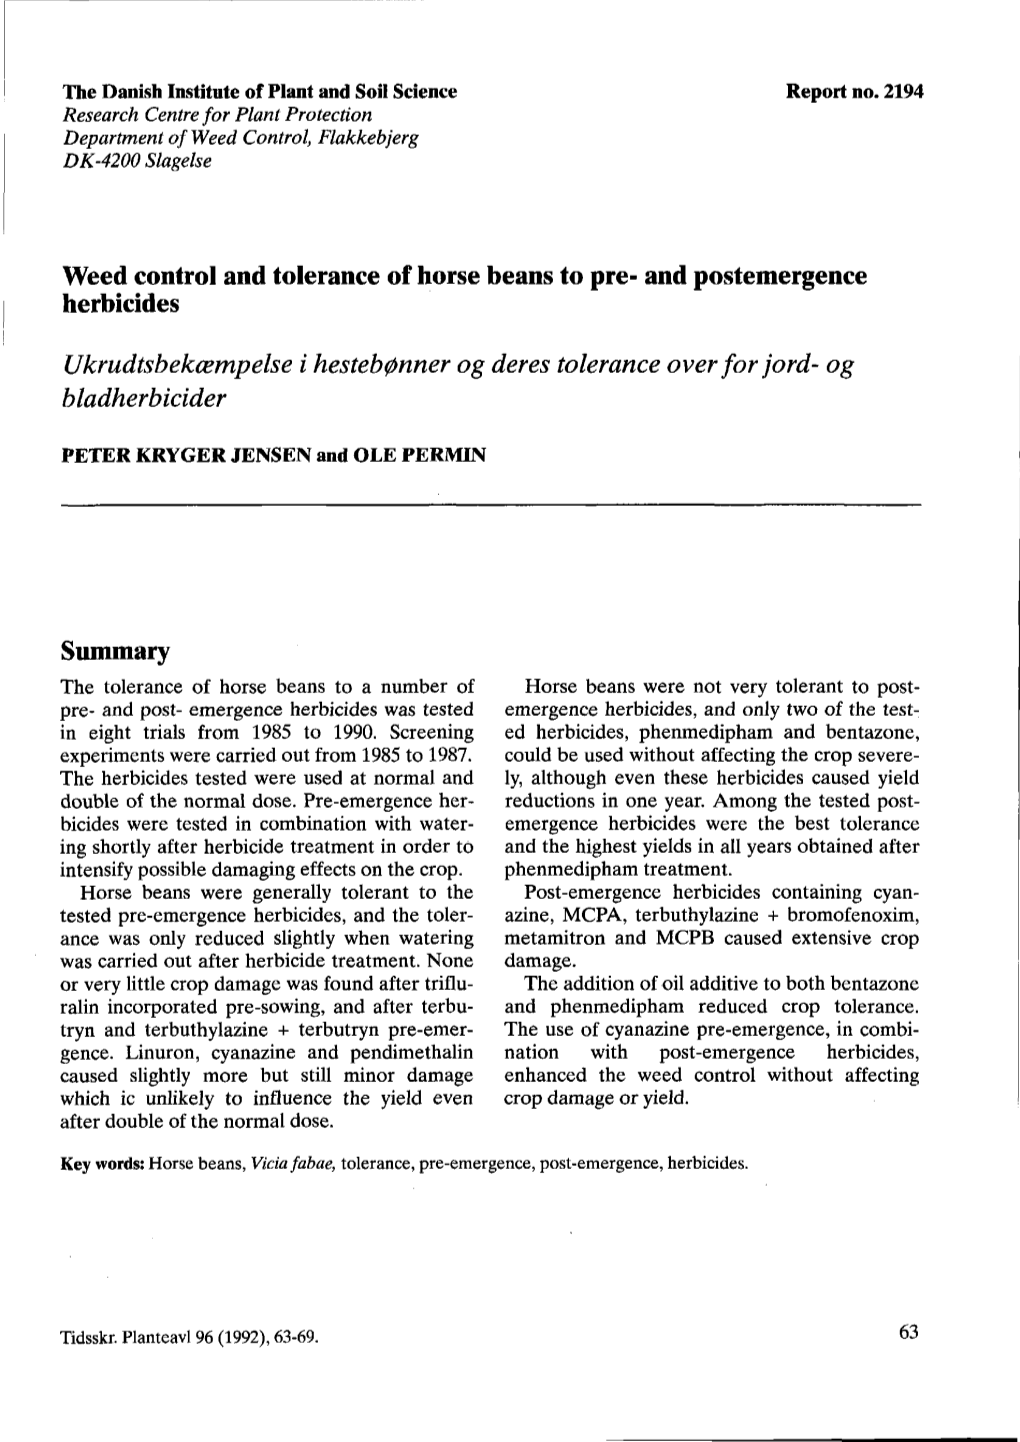 Weed Control and Tolerance of Horse Beans to Pre- and Postemergence Herbicides